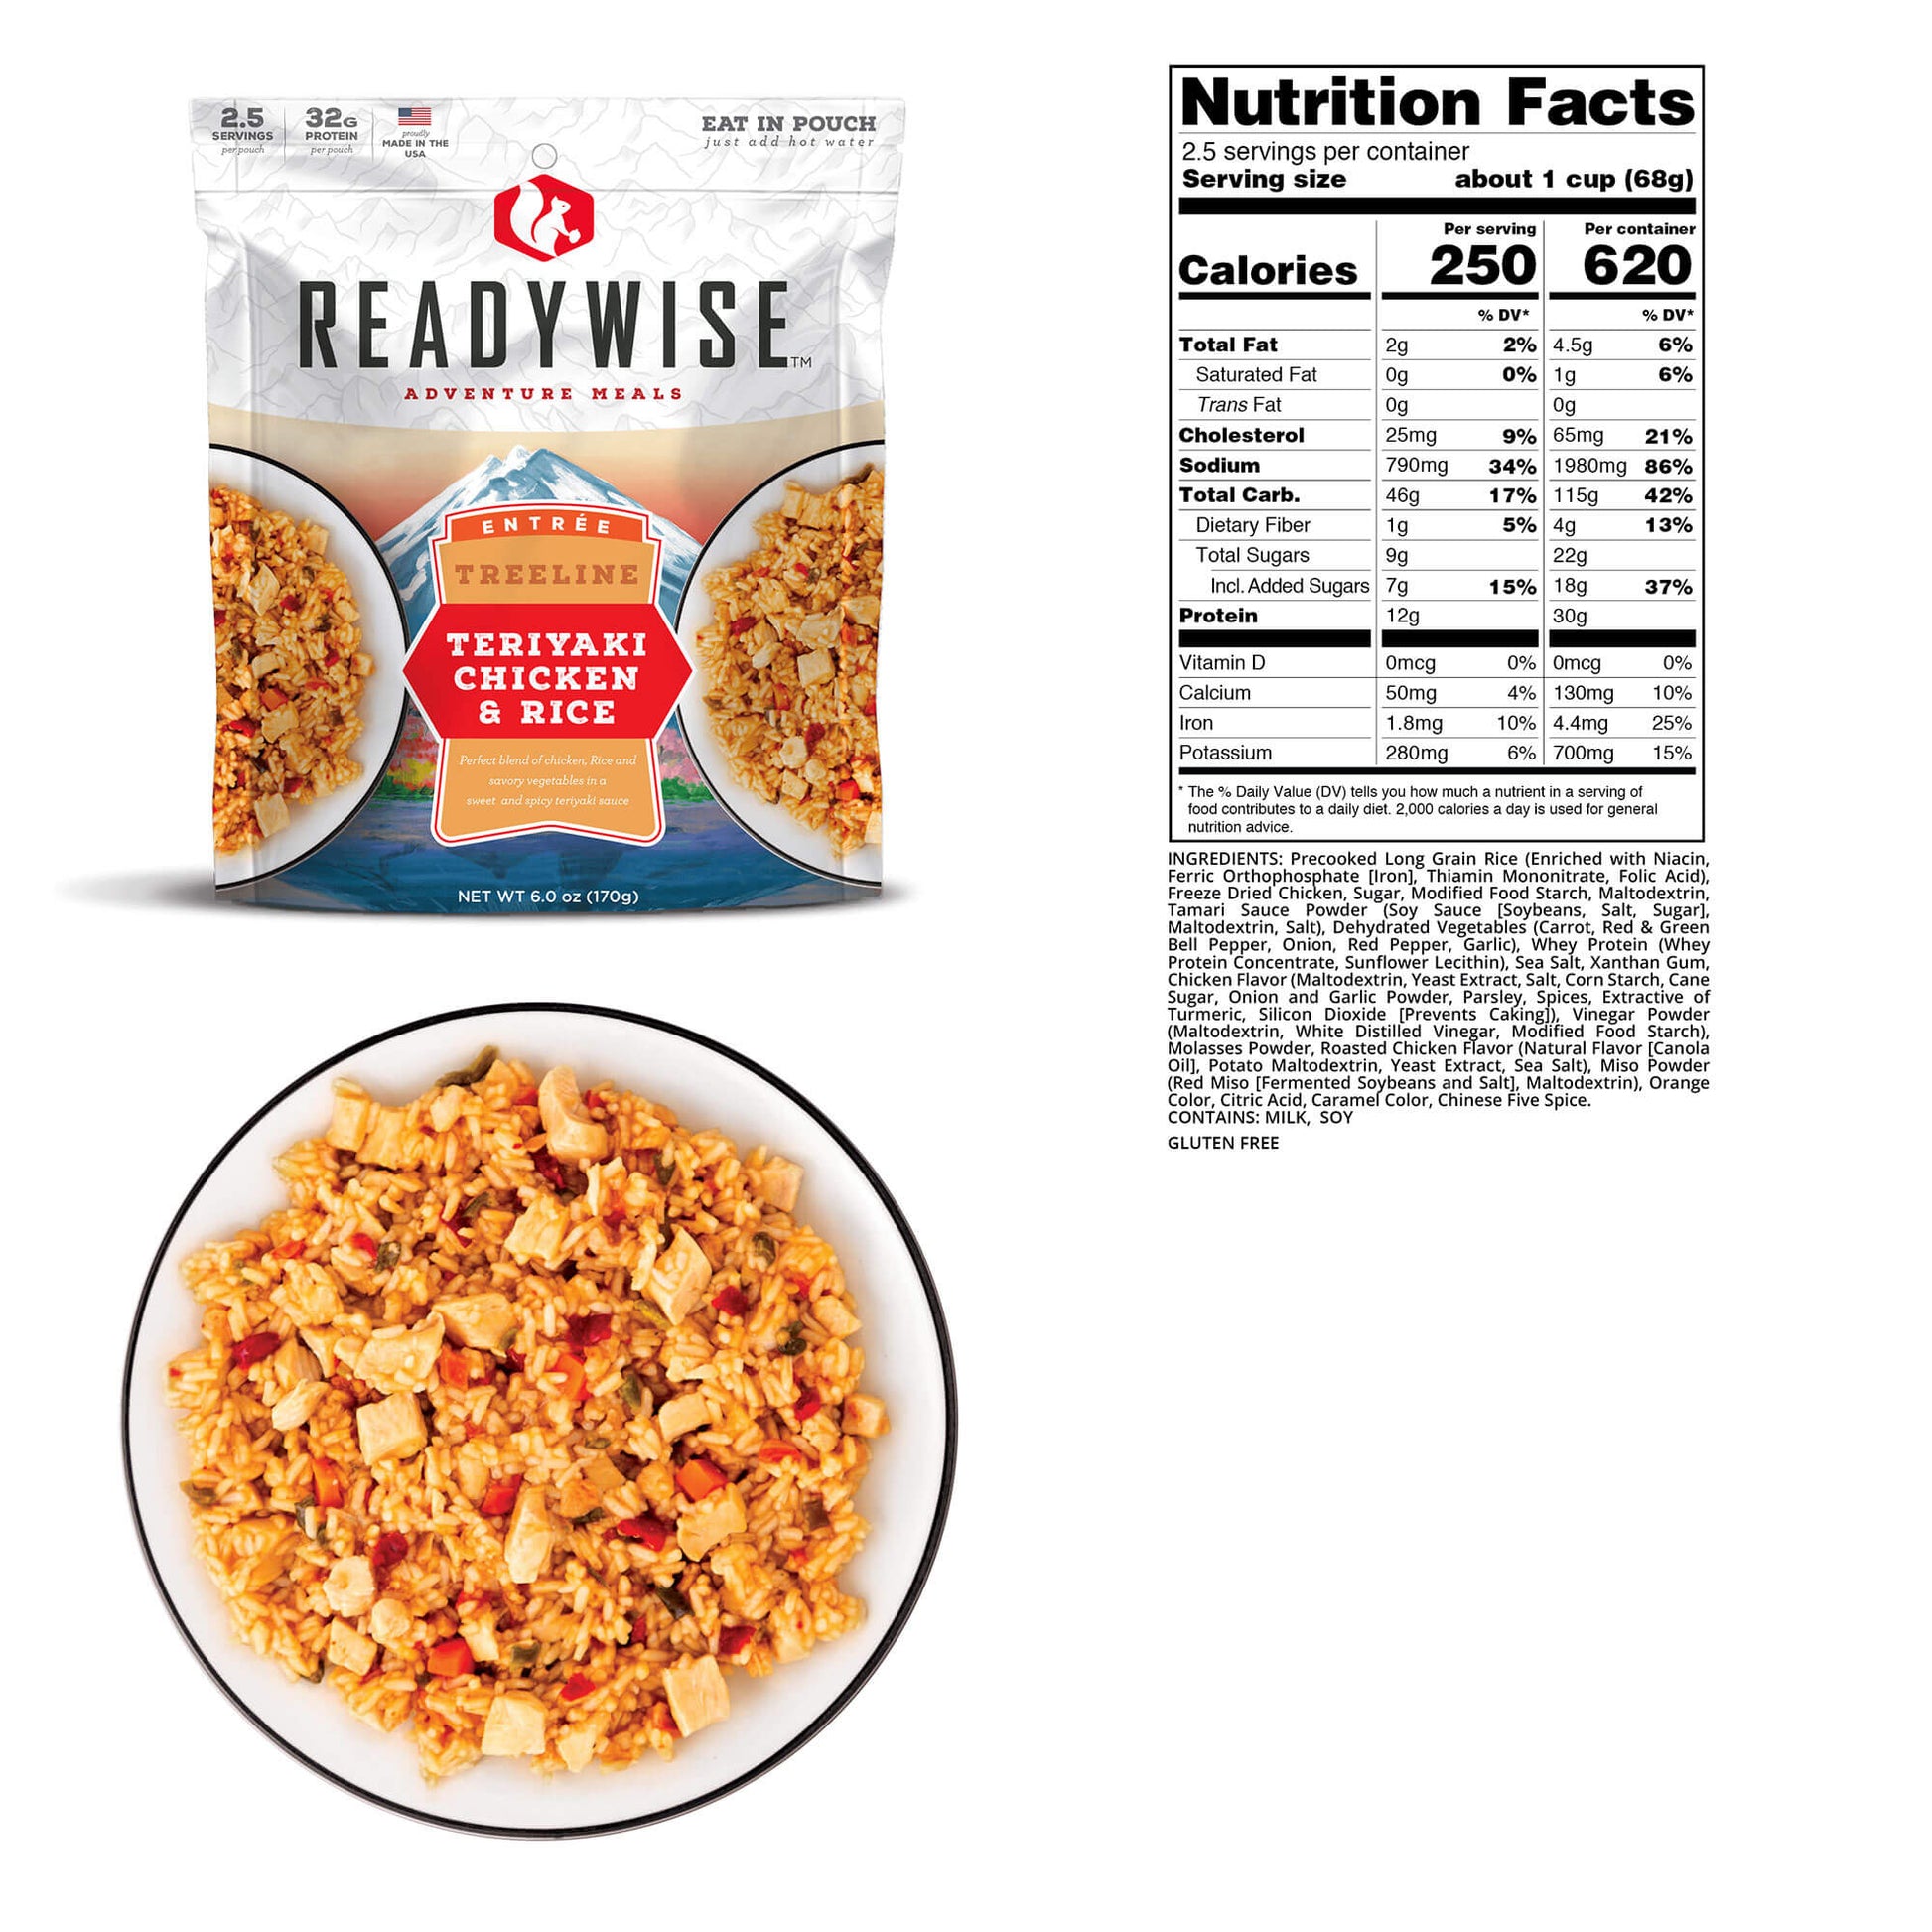 readywise adventure meals 2 day adventure bag teriyaki chicken and rice nutritional information 